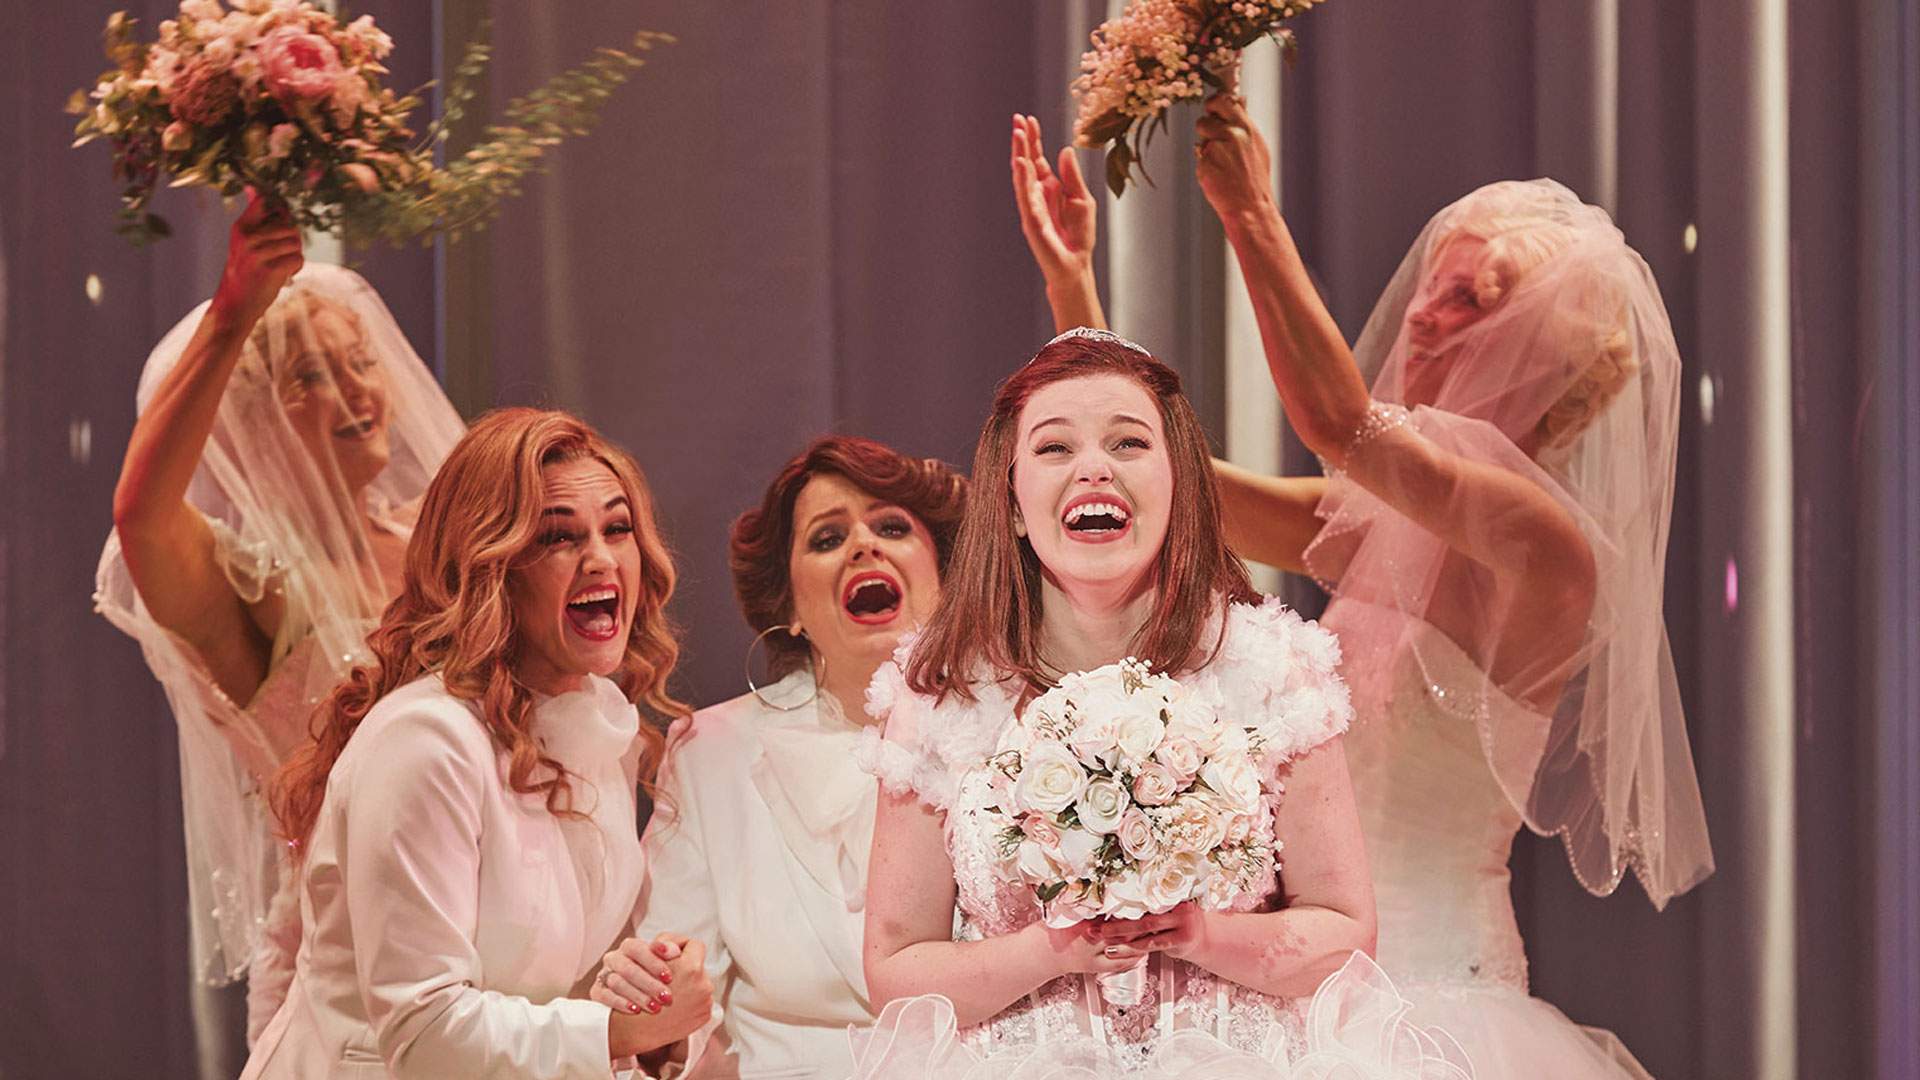 Sydney's Sell-Out Musical Version of 'Muriel's Wedding' Is Coming to Brisbane